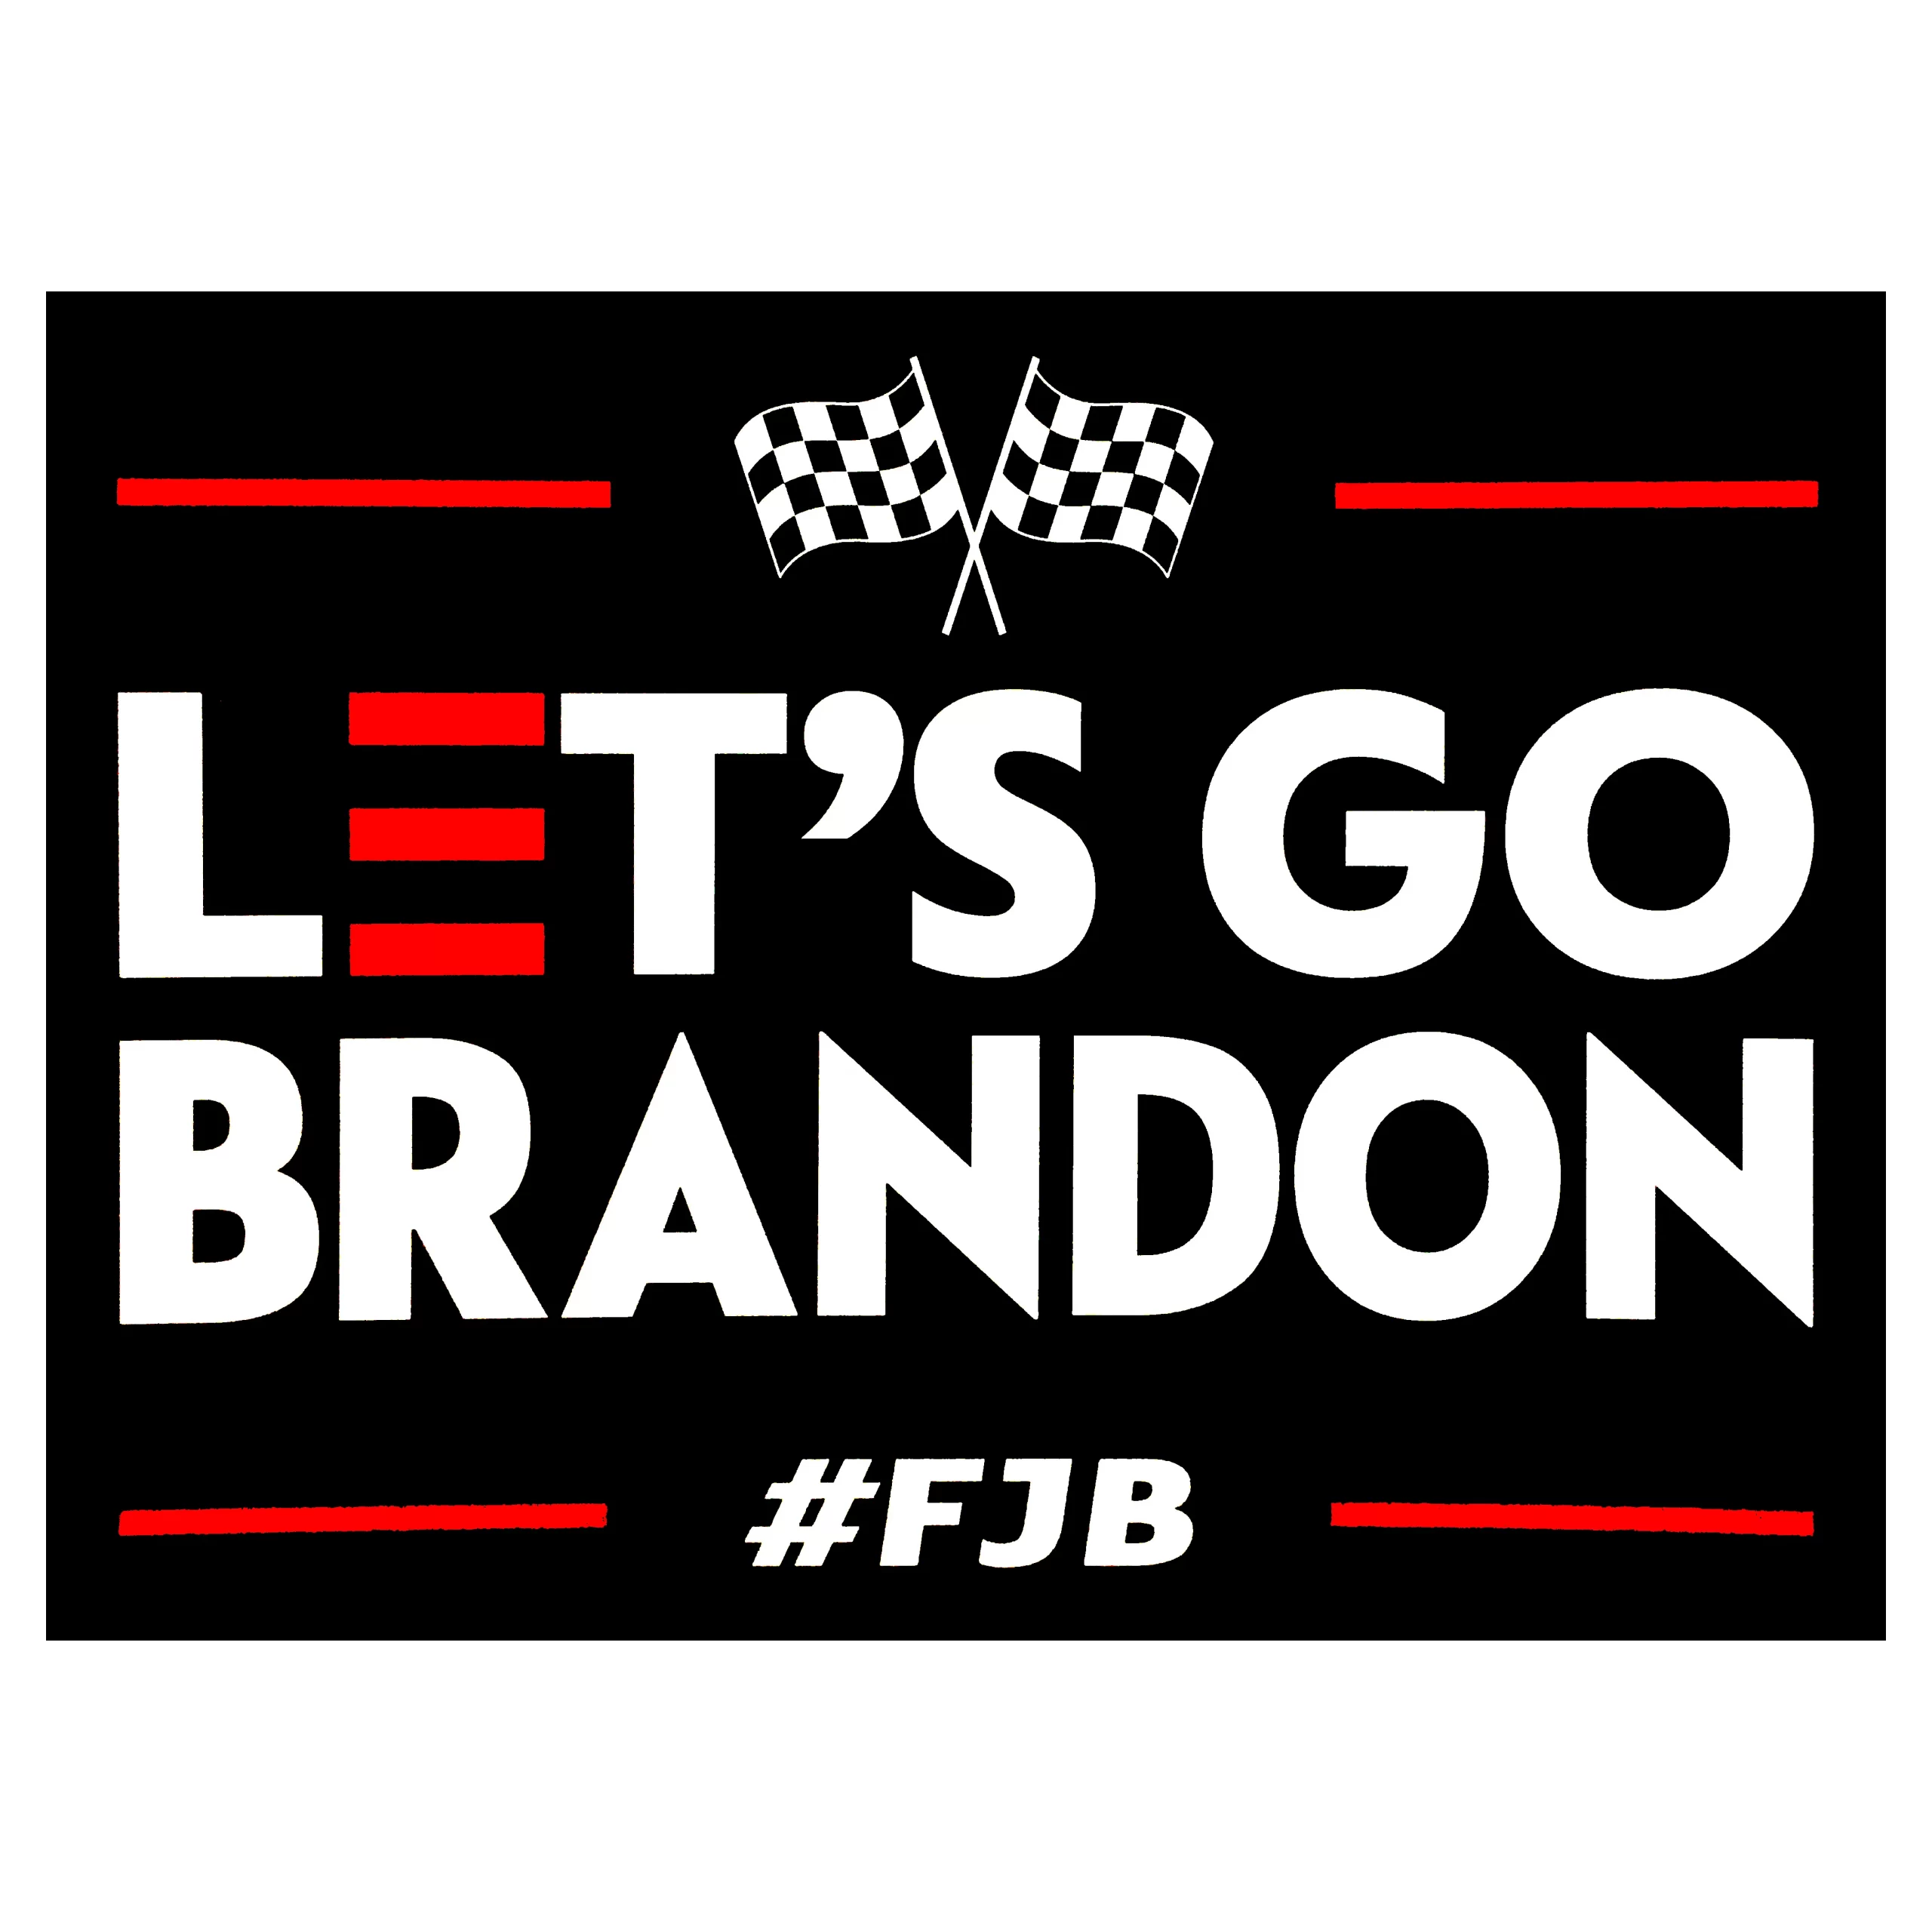 LET'S GO BRANDON Party Supplies Yard Sign - Teeholly